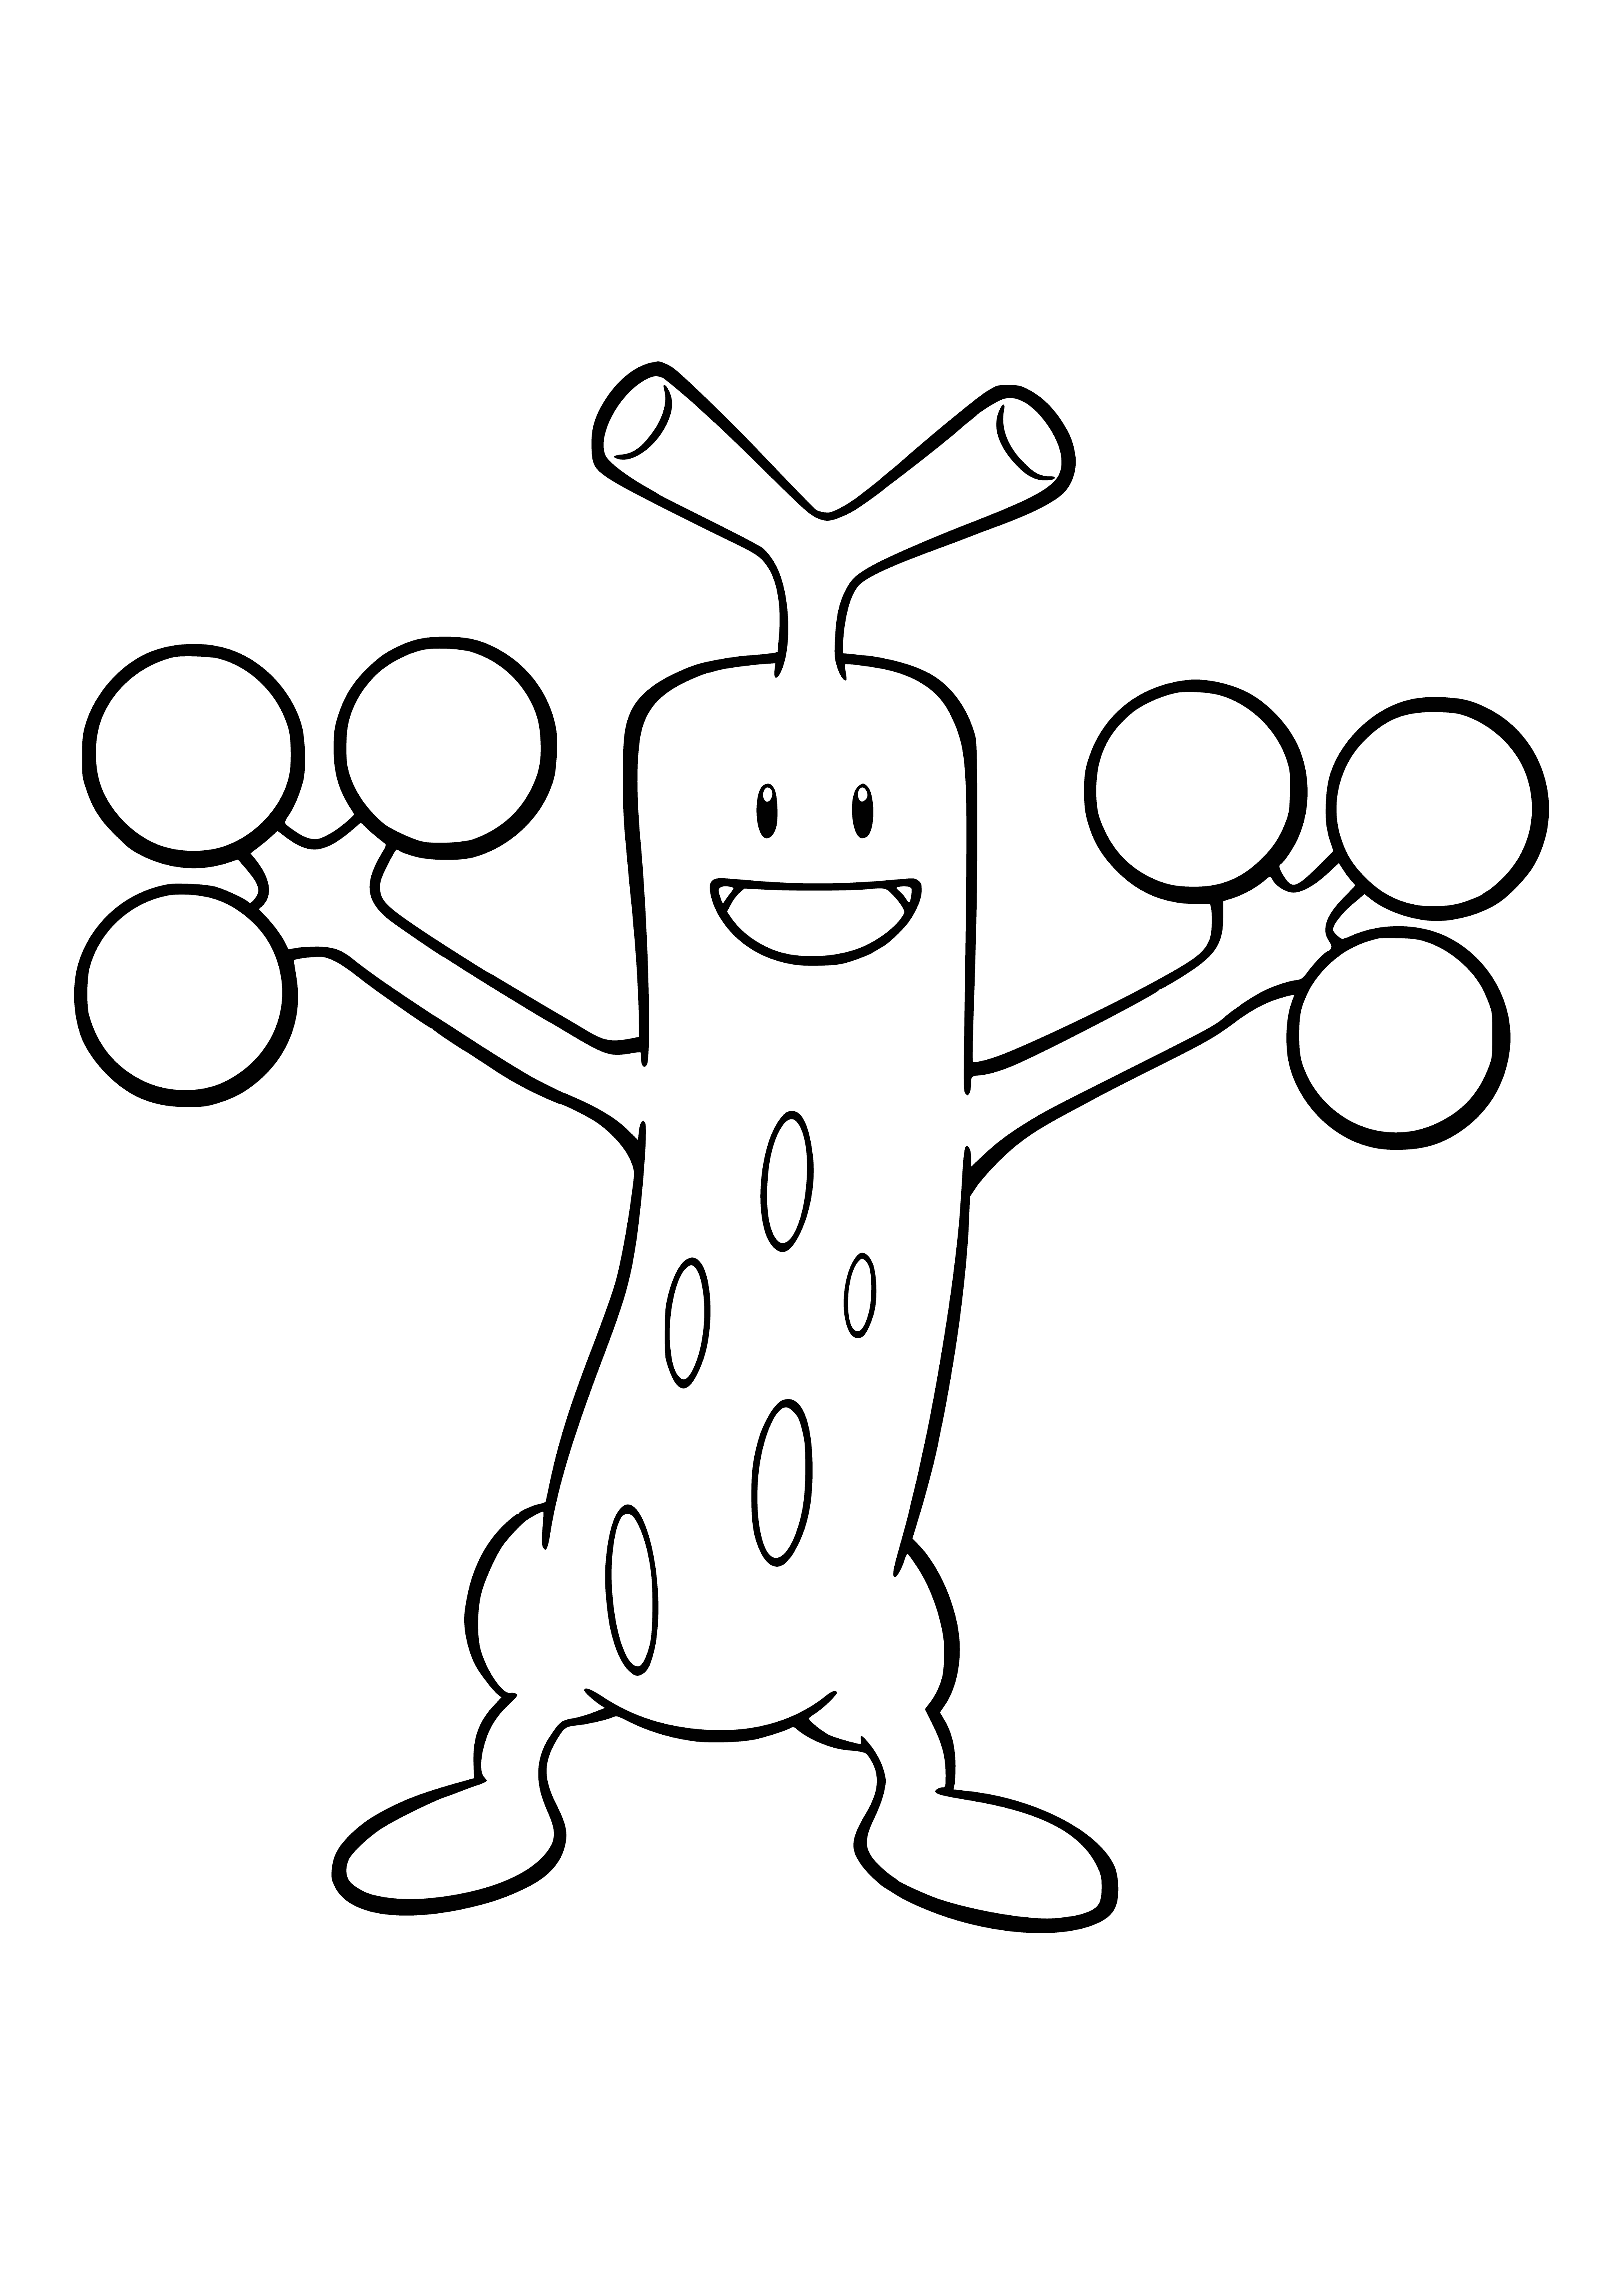 coloring page: Sudowudo evolves from Bonsly and is large, brown, has spikes on arms/legs, small head & mouth, and black eyes.